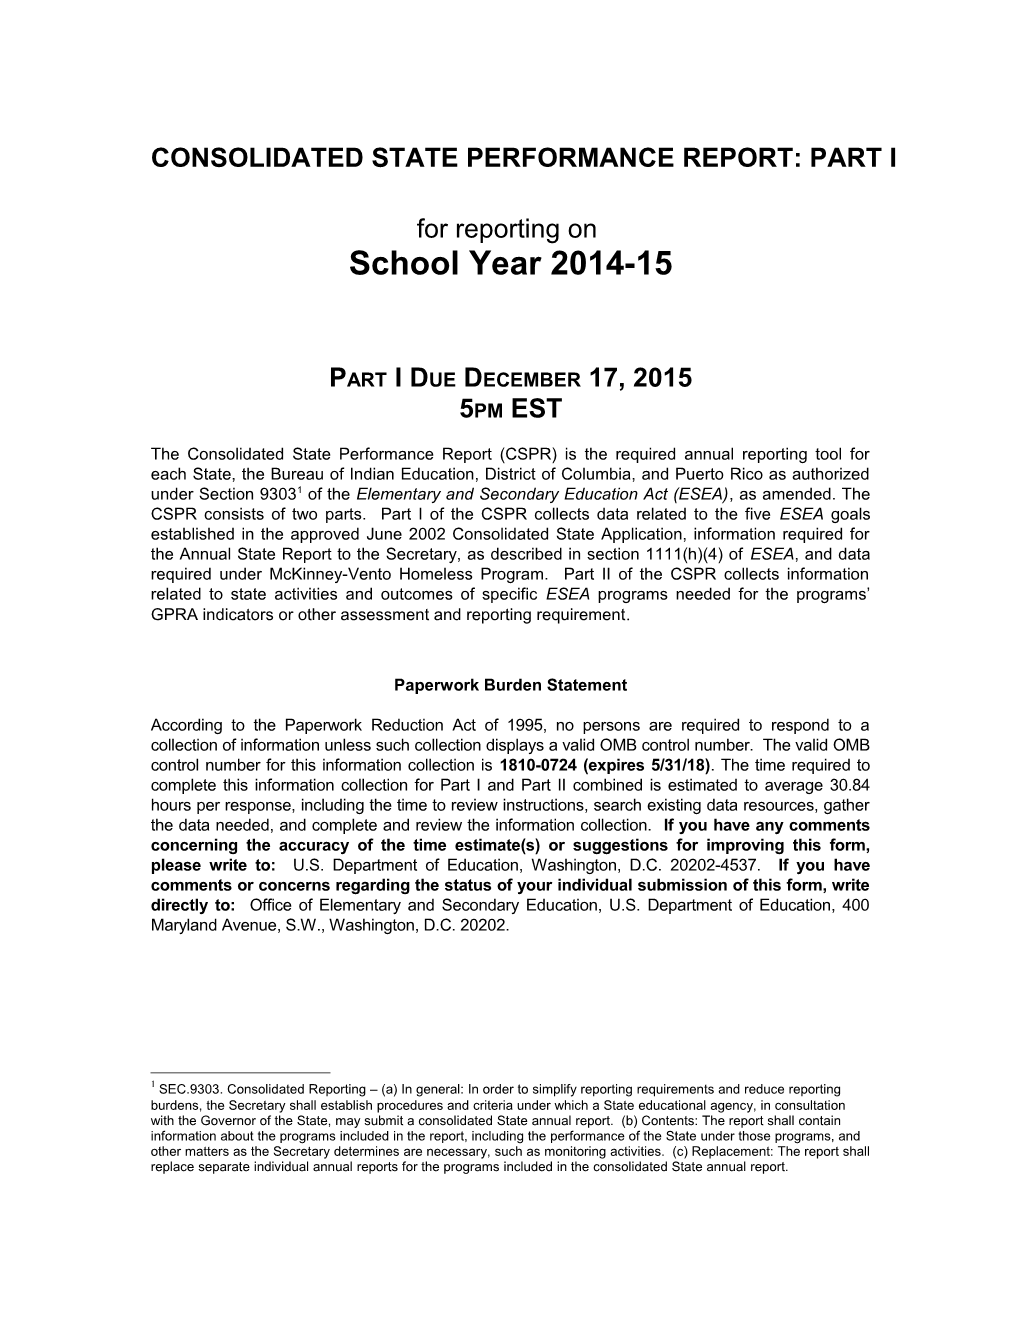 Consolidated State Performance Report: Part I for Reporting on School Year 2014-15 (MS Word)